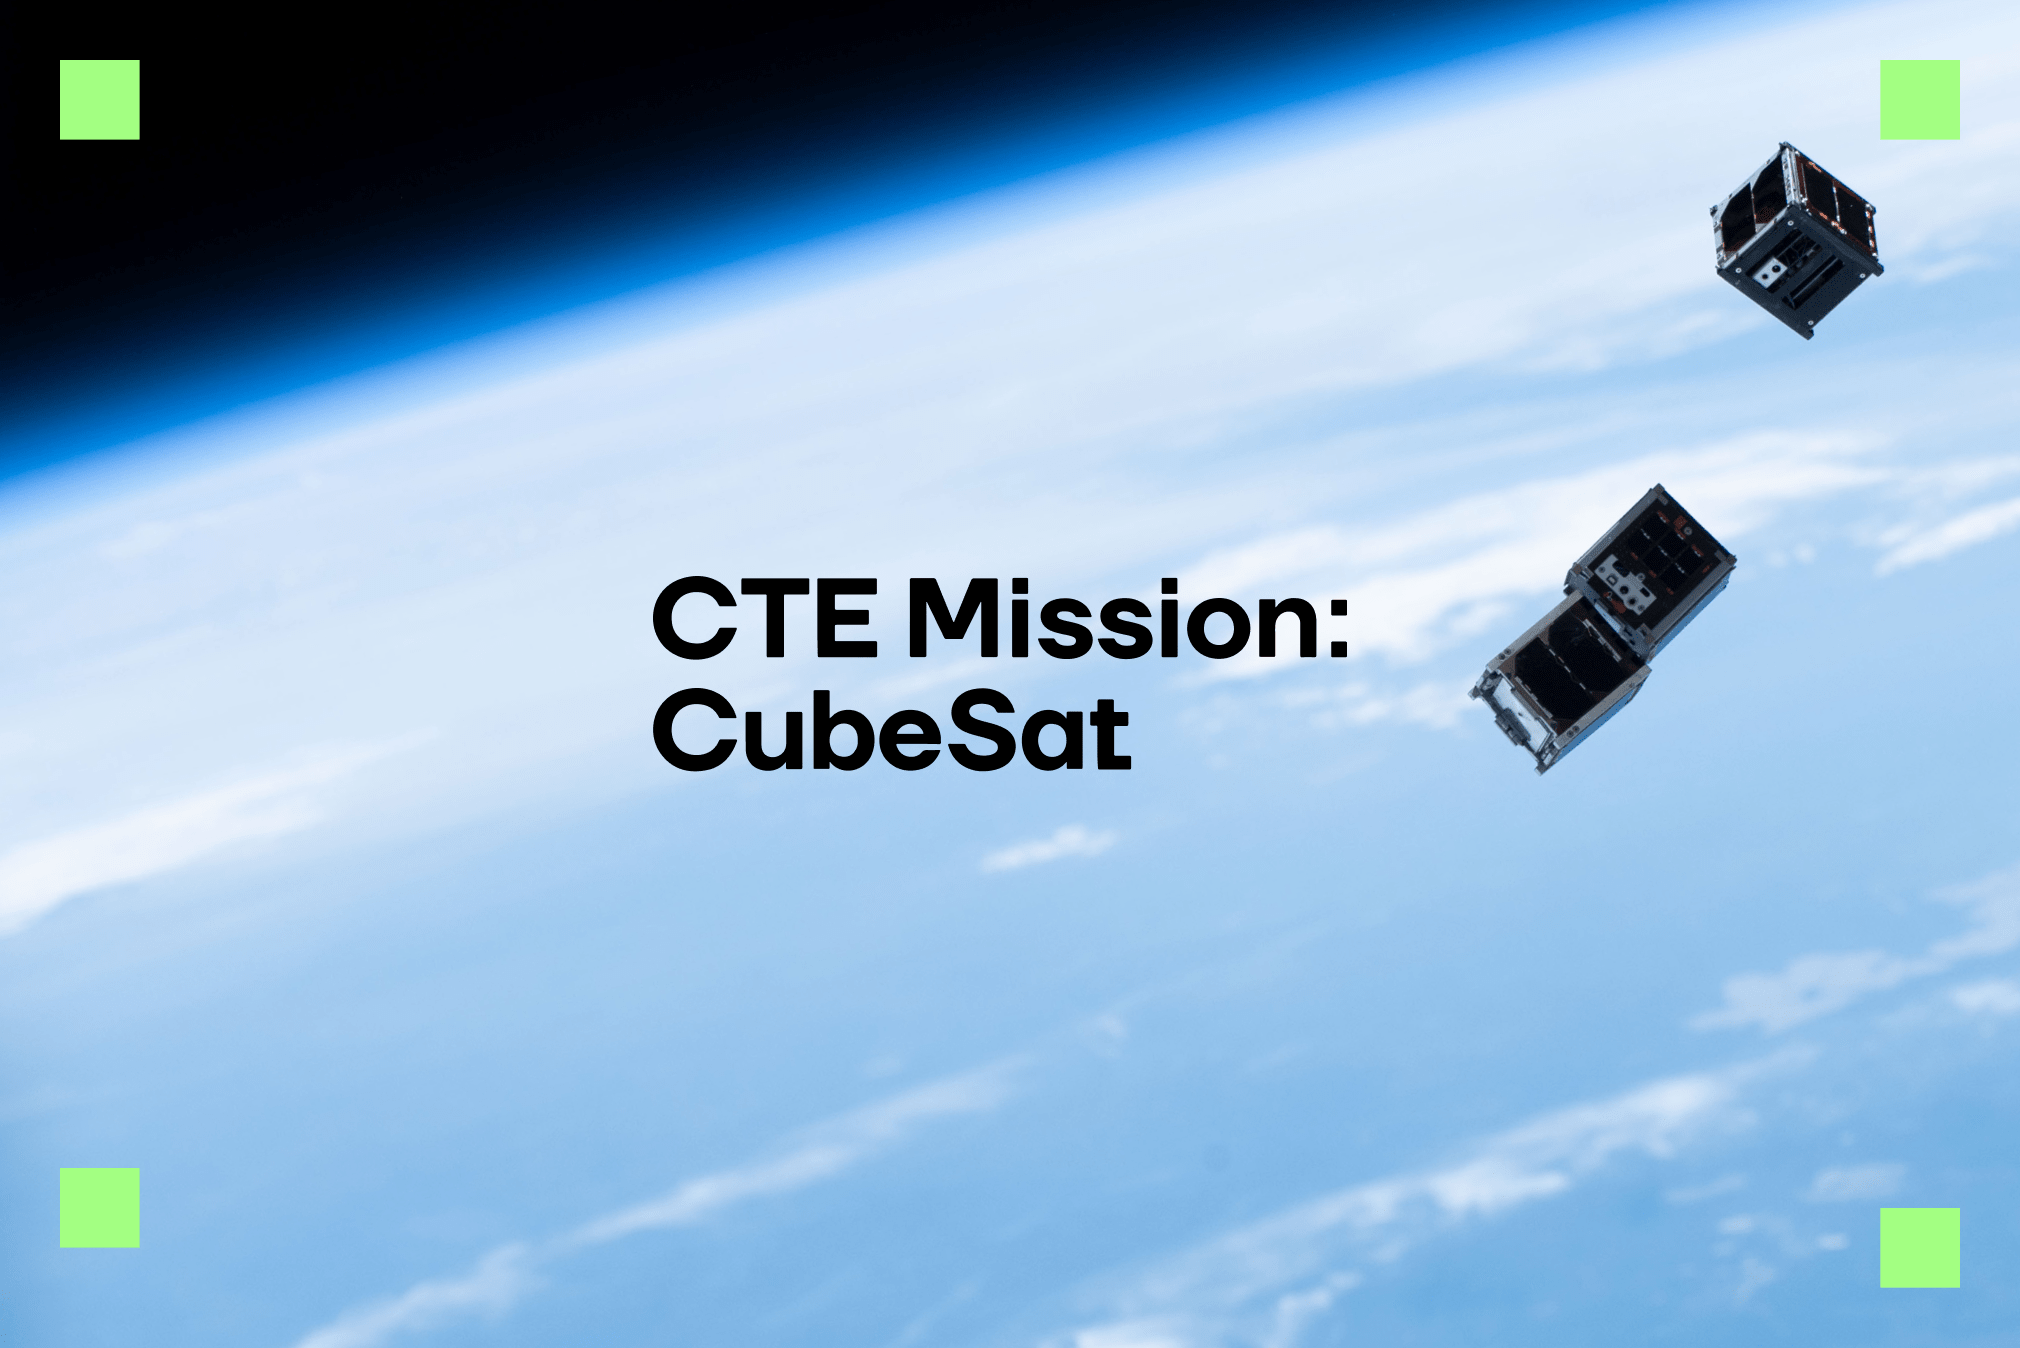 CTE Mission: CubeSat brings space missions to students